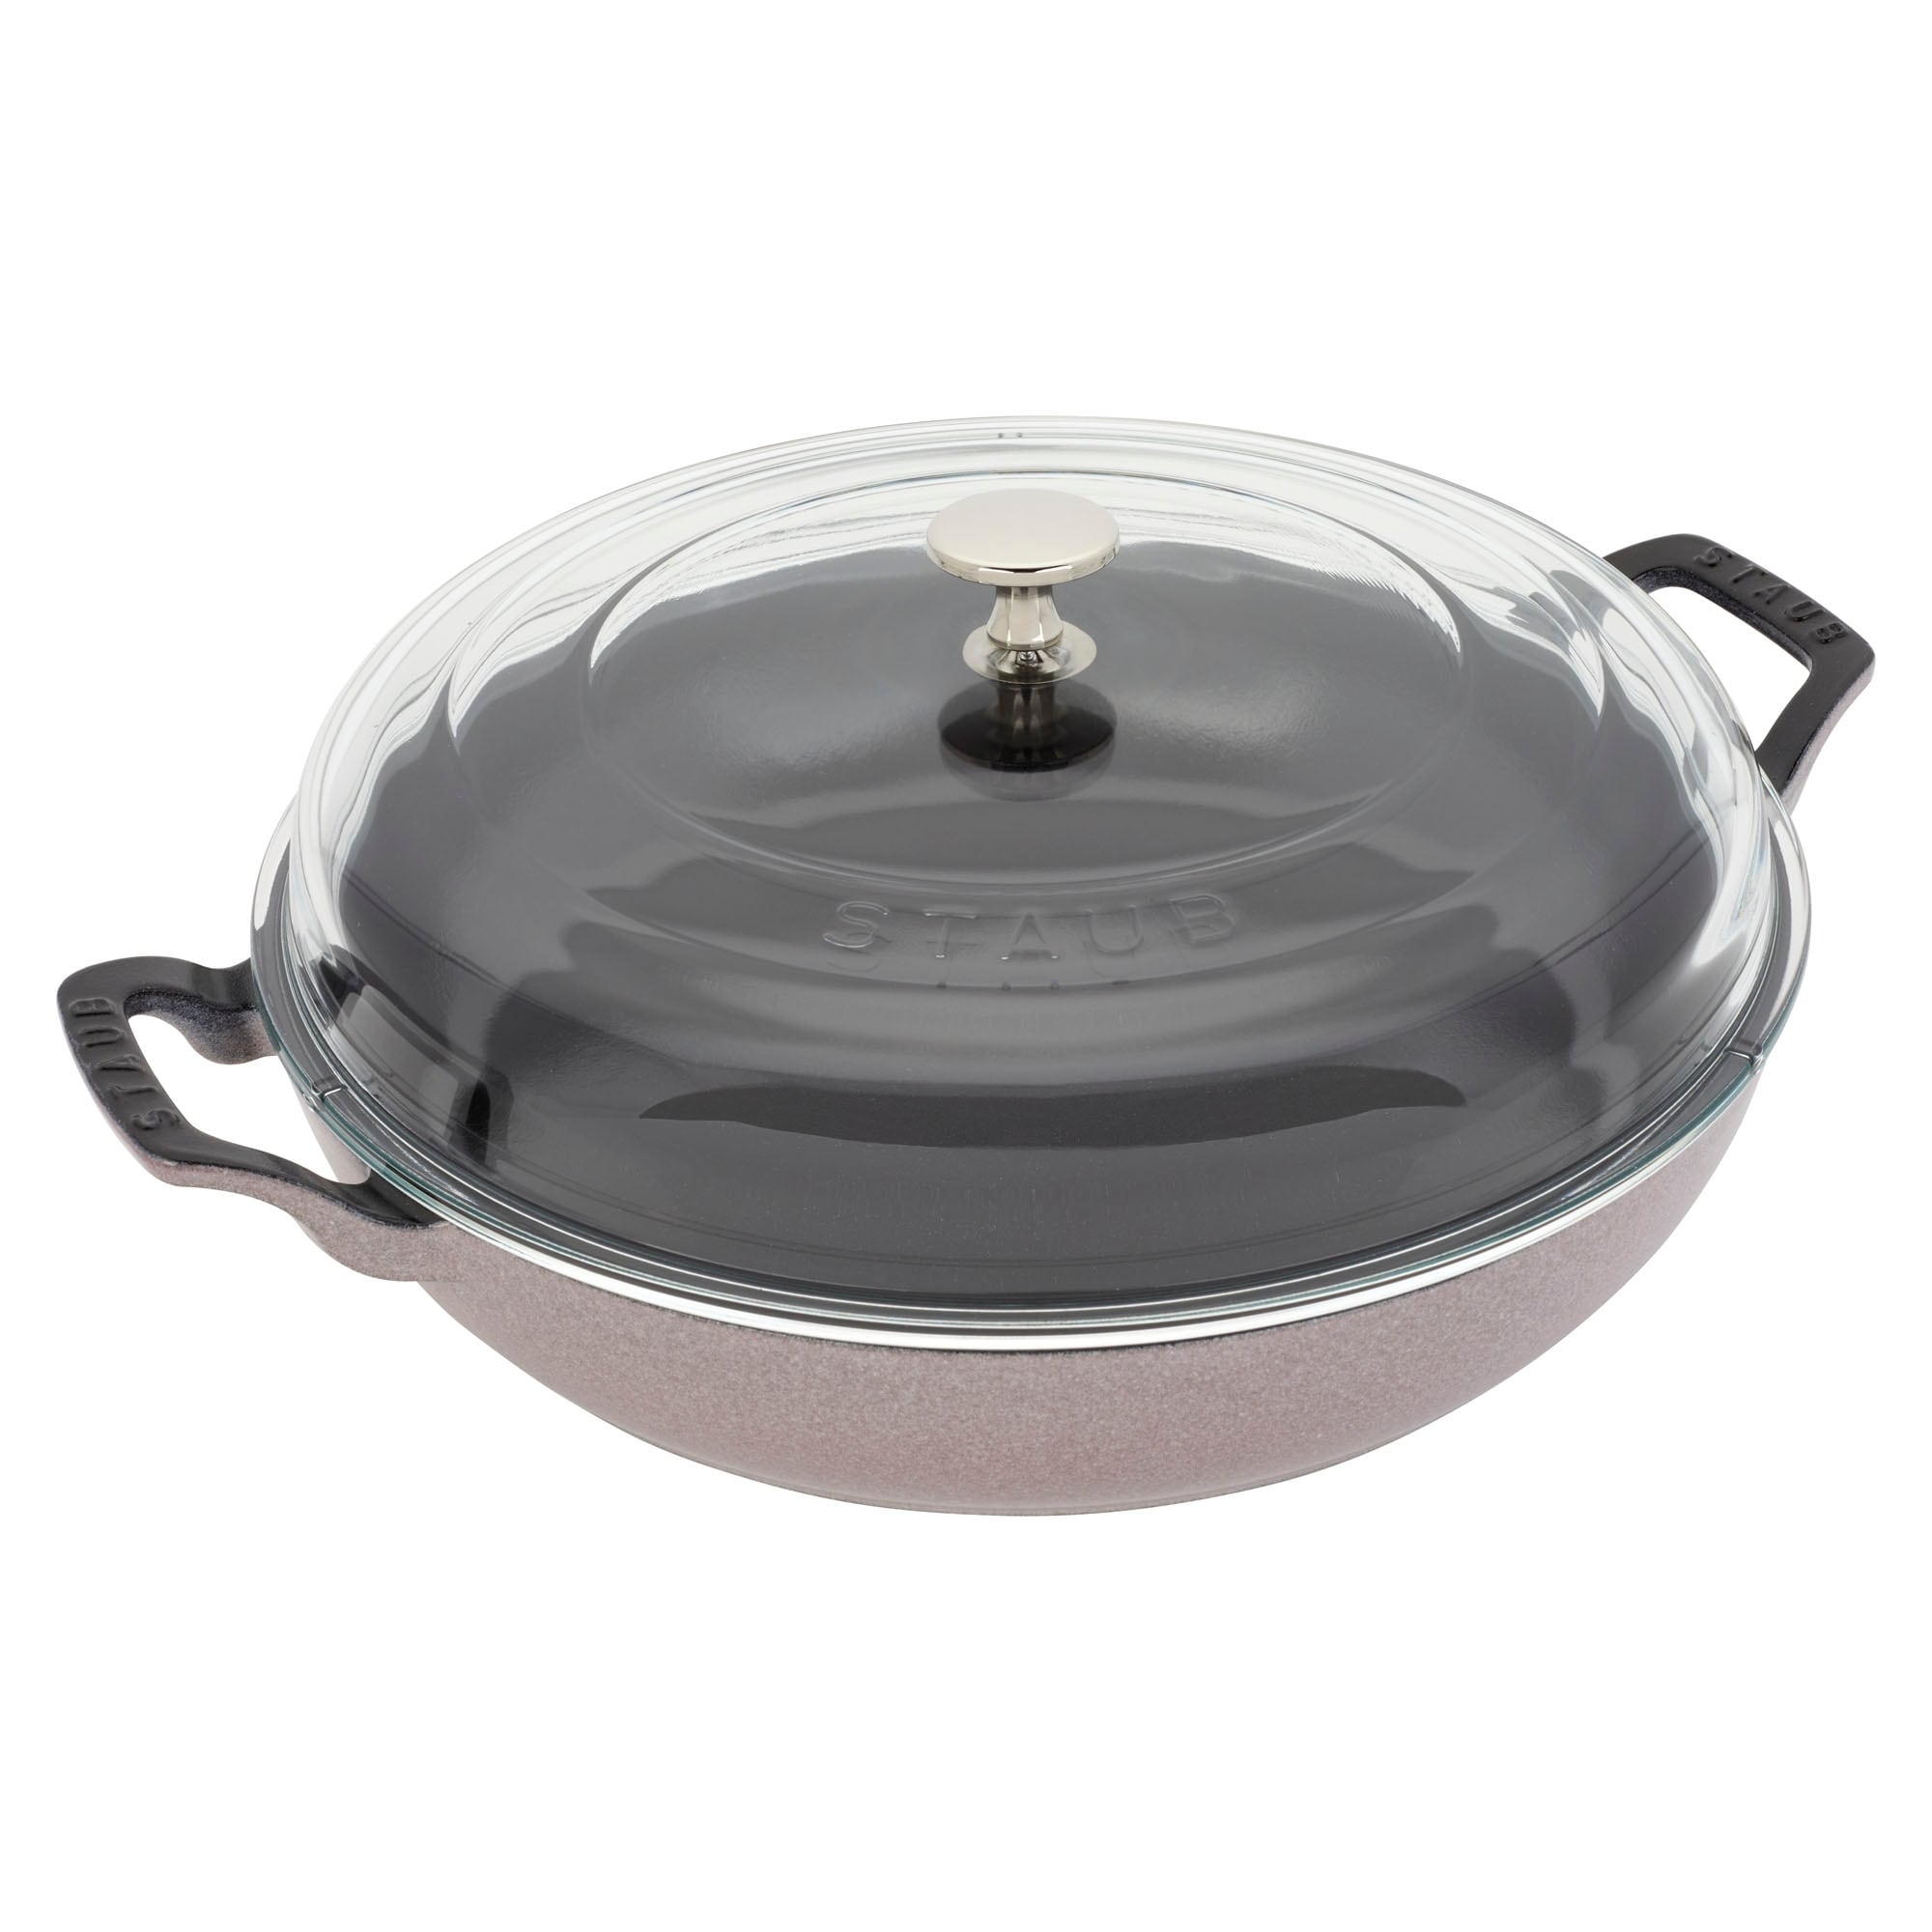 https://ak1.ostkcdn.com/images/products/is/images/direct/7866fc050d3985738dd2c7de5e10f7c8b67152d2/STAUB-Cast-Iron-3.5-qt-Braiser-with-Glass-Lid.jpg